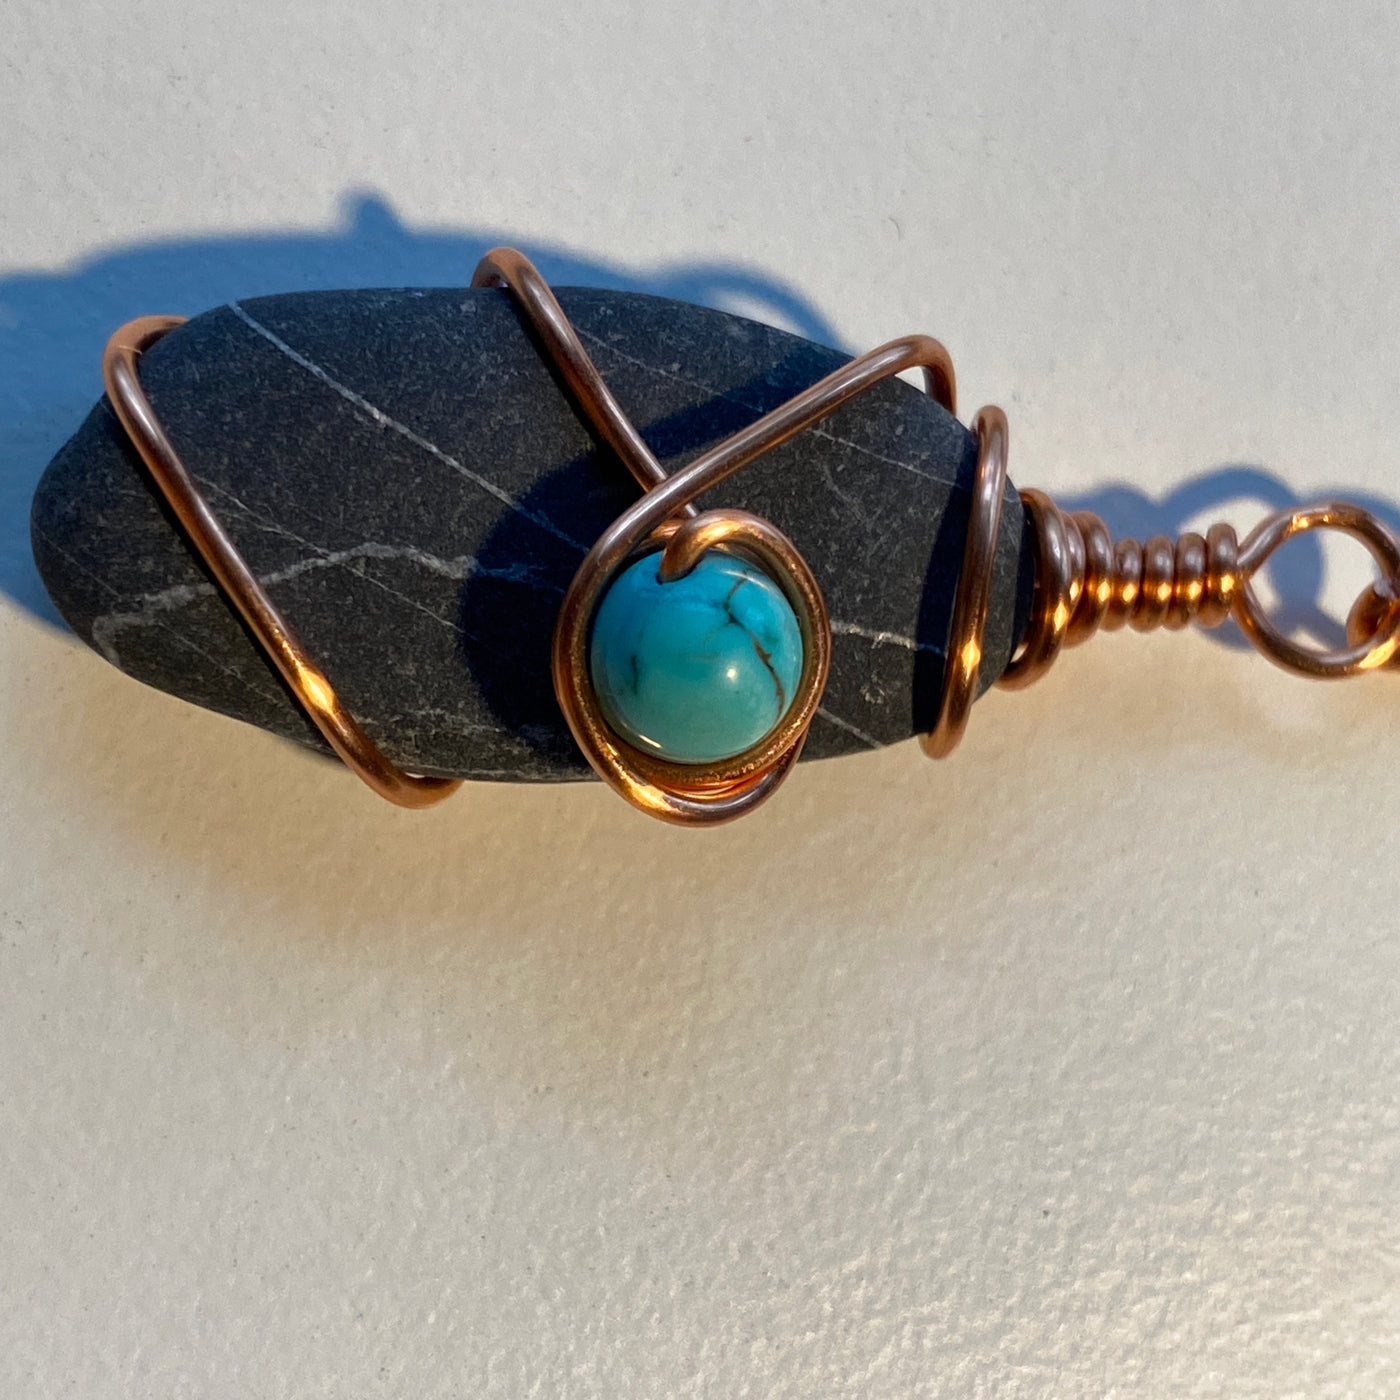 Black stone, turquoise and wire